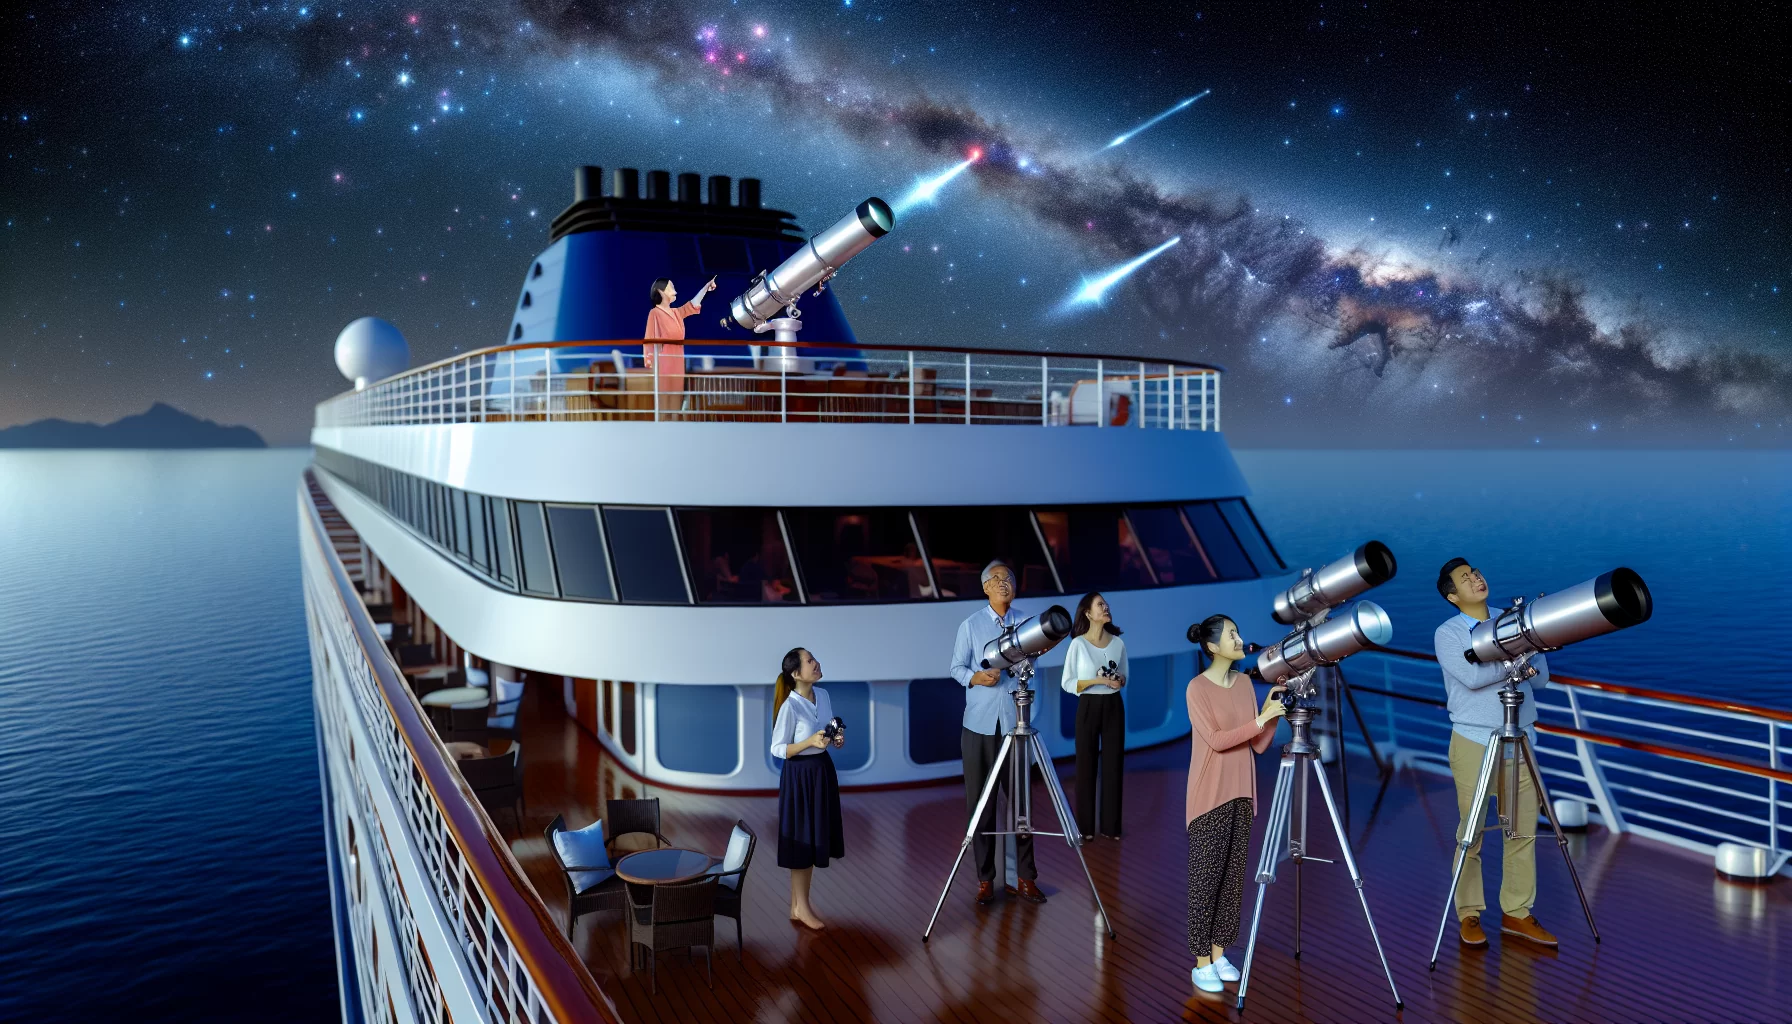 Explore the cosmos aboard Atlas Ocean Voyages, a luxury cruise with astronomical adventures